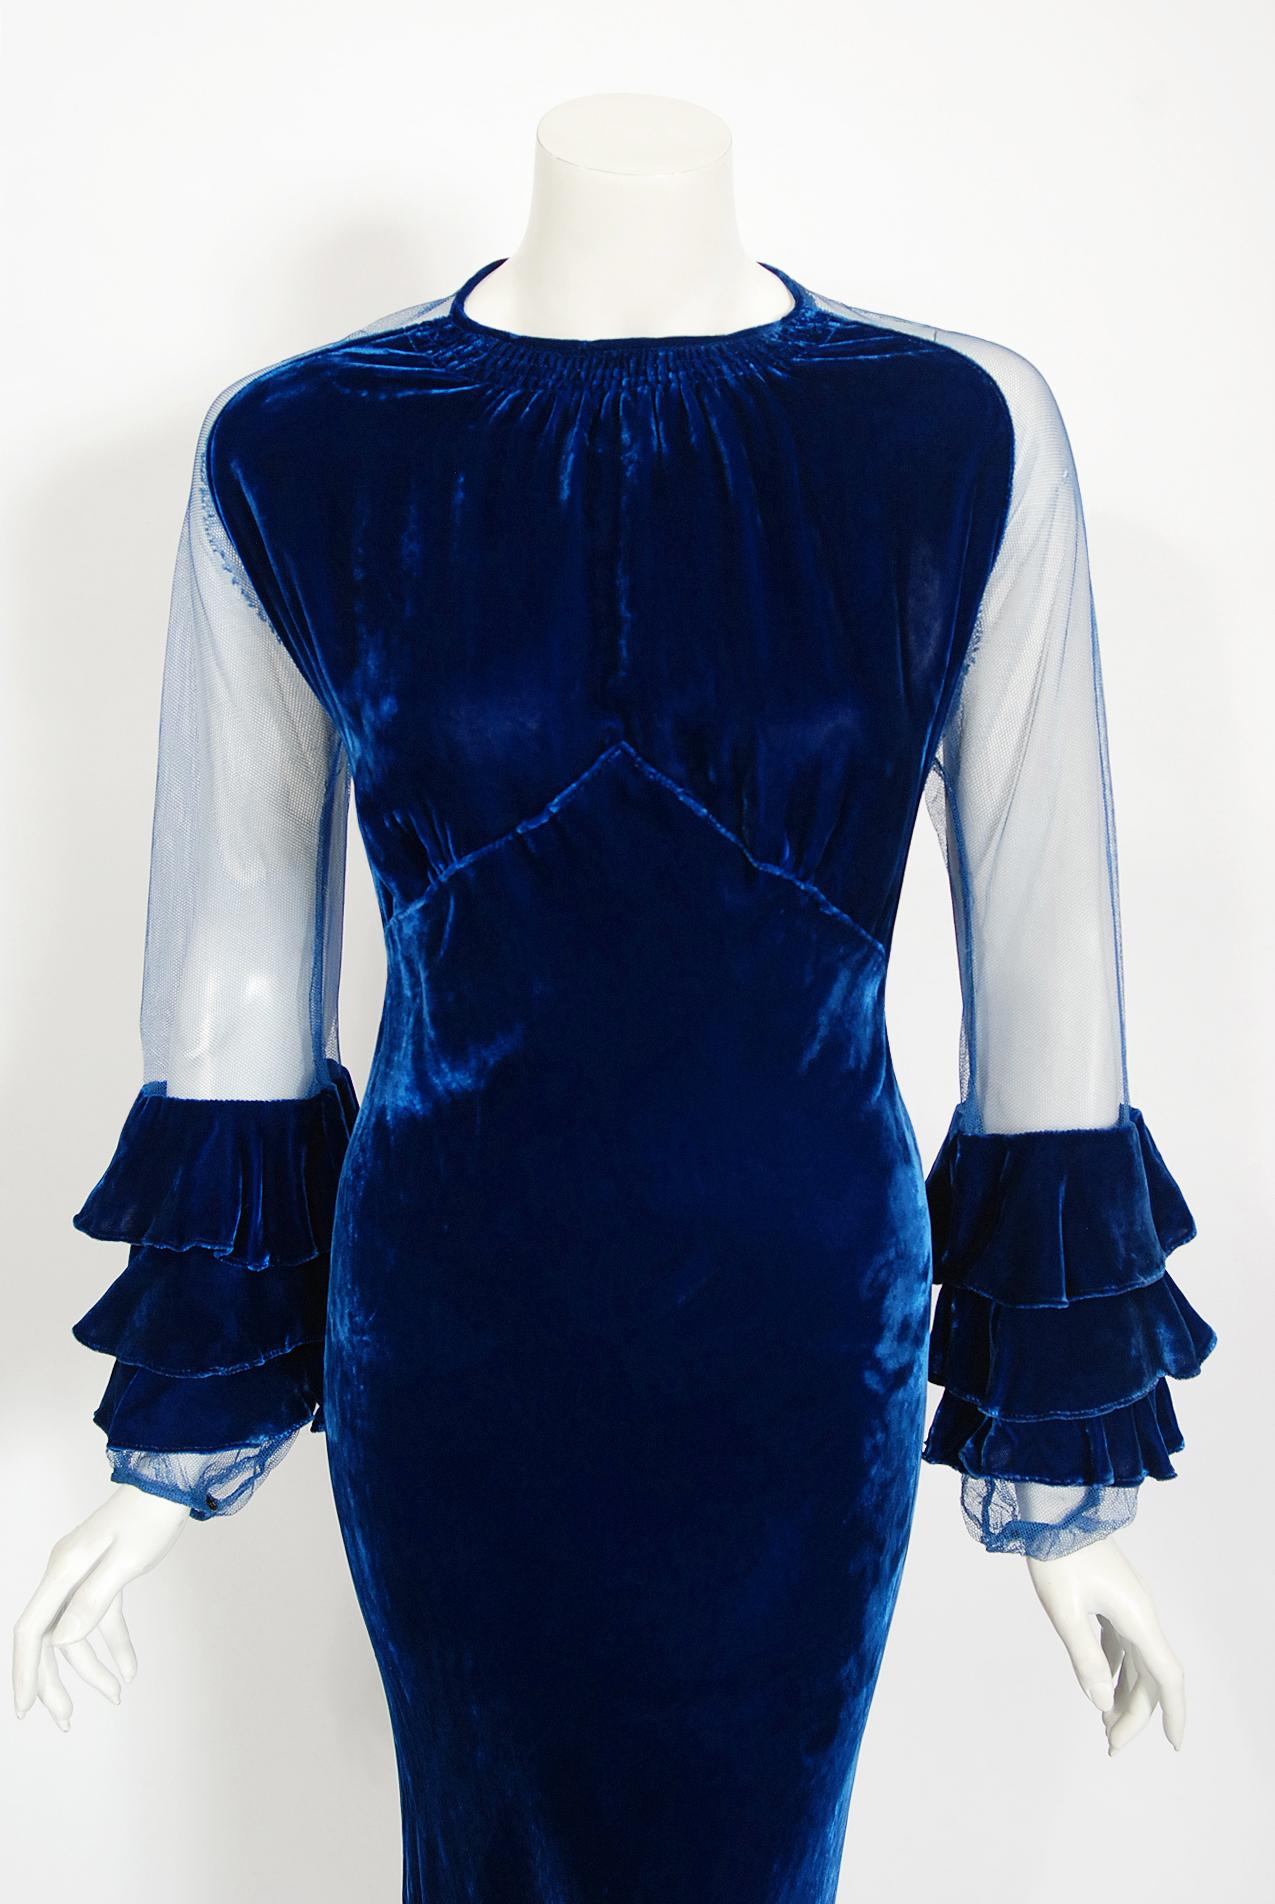 There are lots of lovely 1930's garments still around, but every once in a while I come across one that sets my heart a flutter! This is an extraordinarily beautiful and exceptional museum quality 1930's sapphire blue silk velvet bias-cut gown. Old